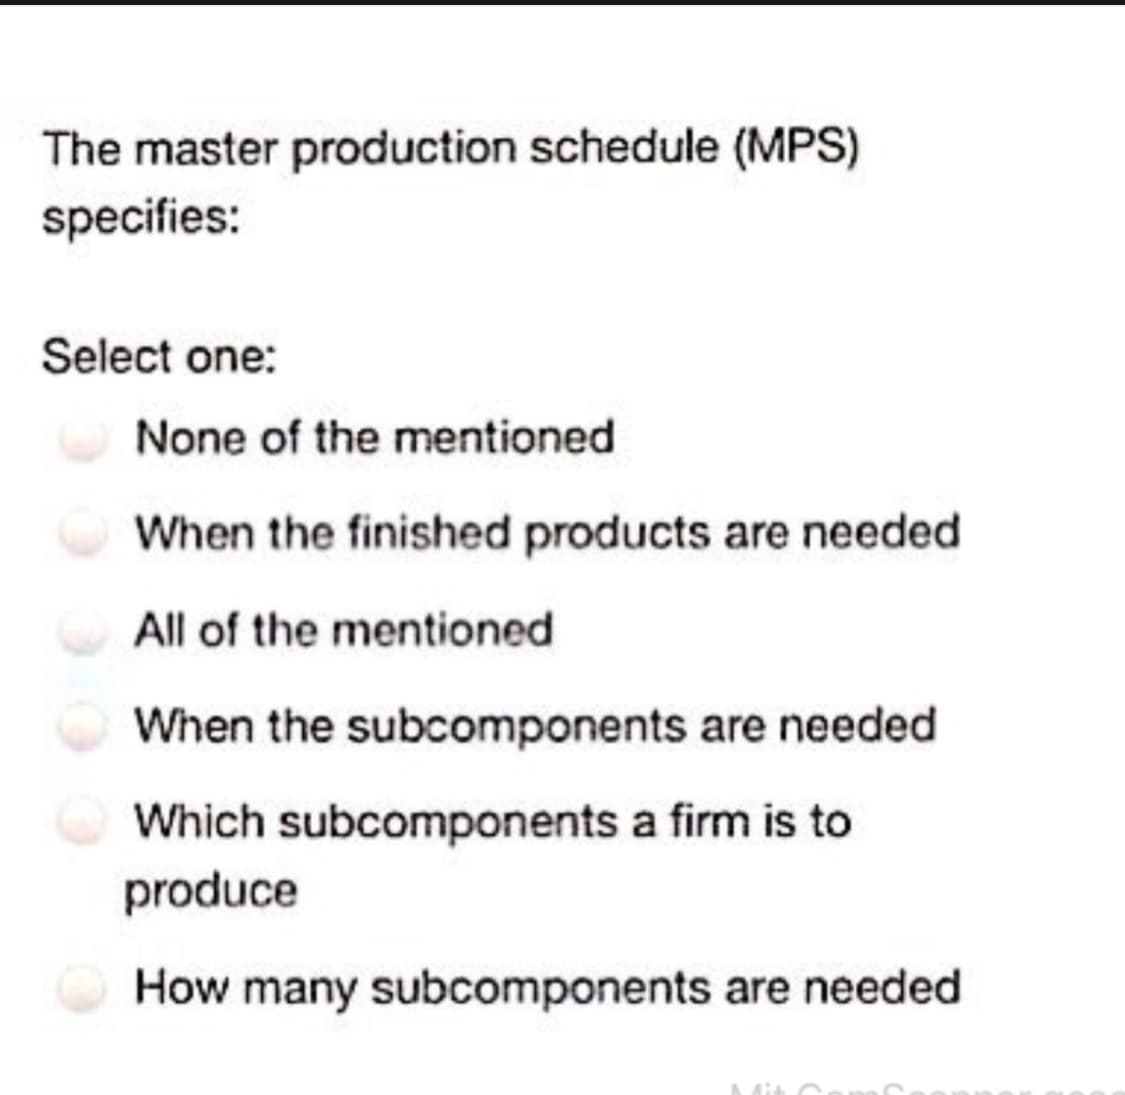 The master production schedule (MPS)
specifies:
Select one:
None of the mentioned
When the finished products are needed
All of the mentioned.
When the subcomponents are needed
Which subcomponents a firm is to
produce
How many subcomponents are needed.
Mit C